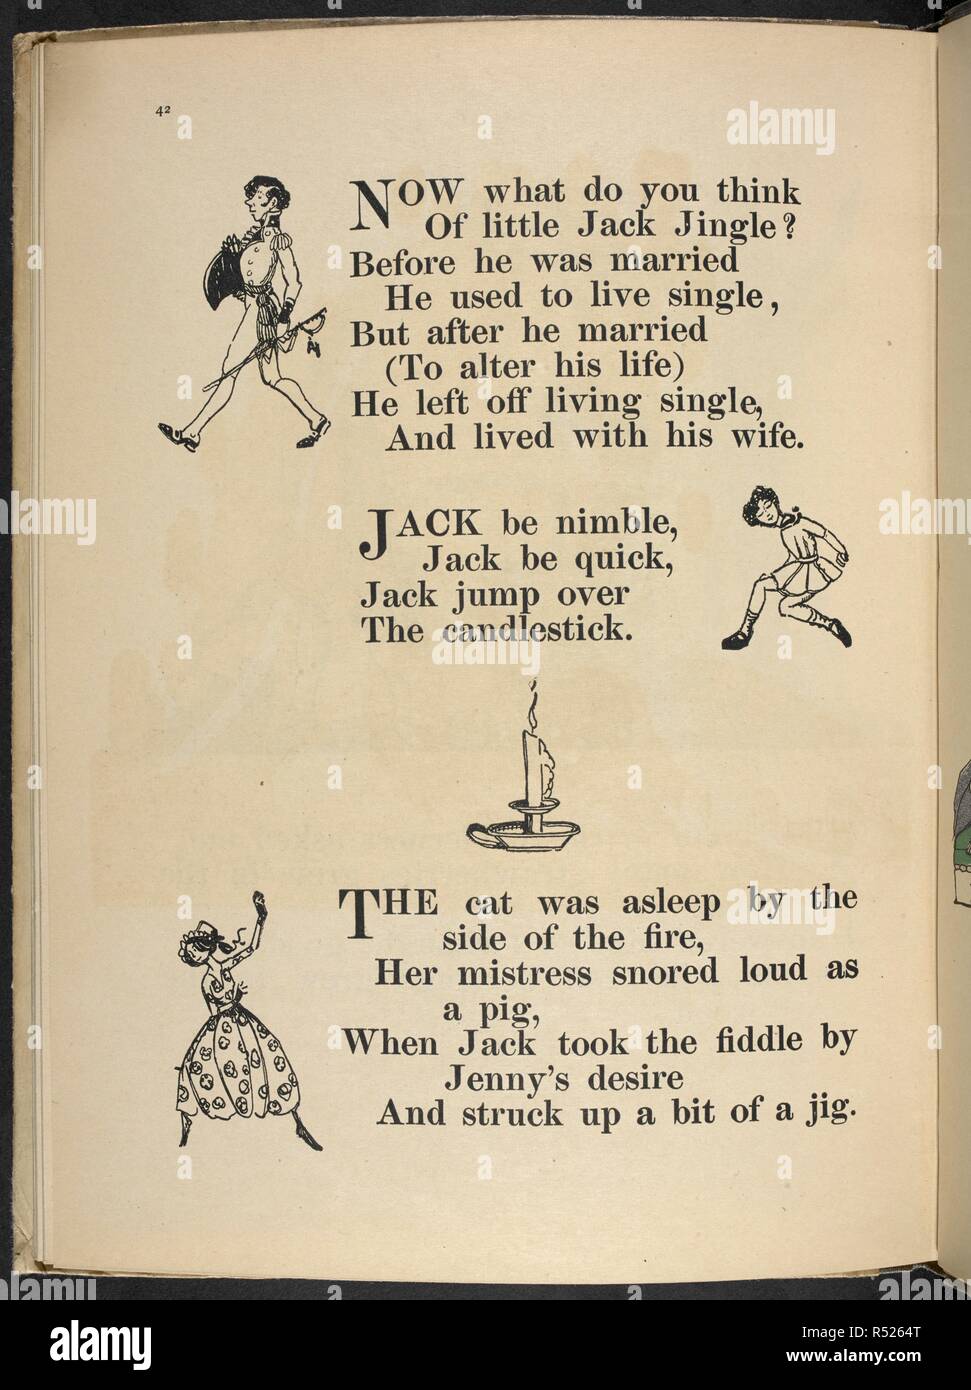 Cross patch, draw the latch, ' . Nursery Rhymes, with pictures by C. L.  Fraser. London : T. C. & E. C. Jack, [1919]. Source: 12800.ddd.31 page 15.  Author: Fraser, Claud Lovat Stock Photo - Alamy